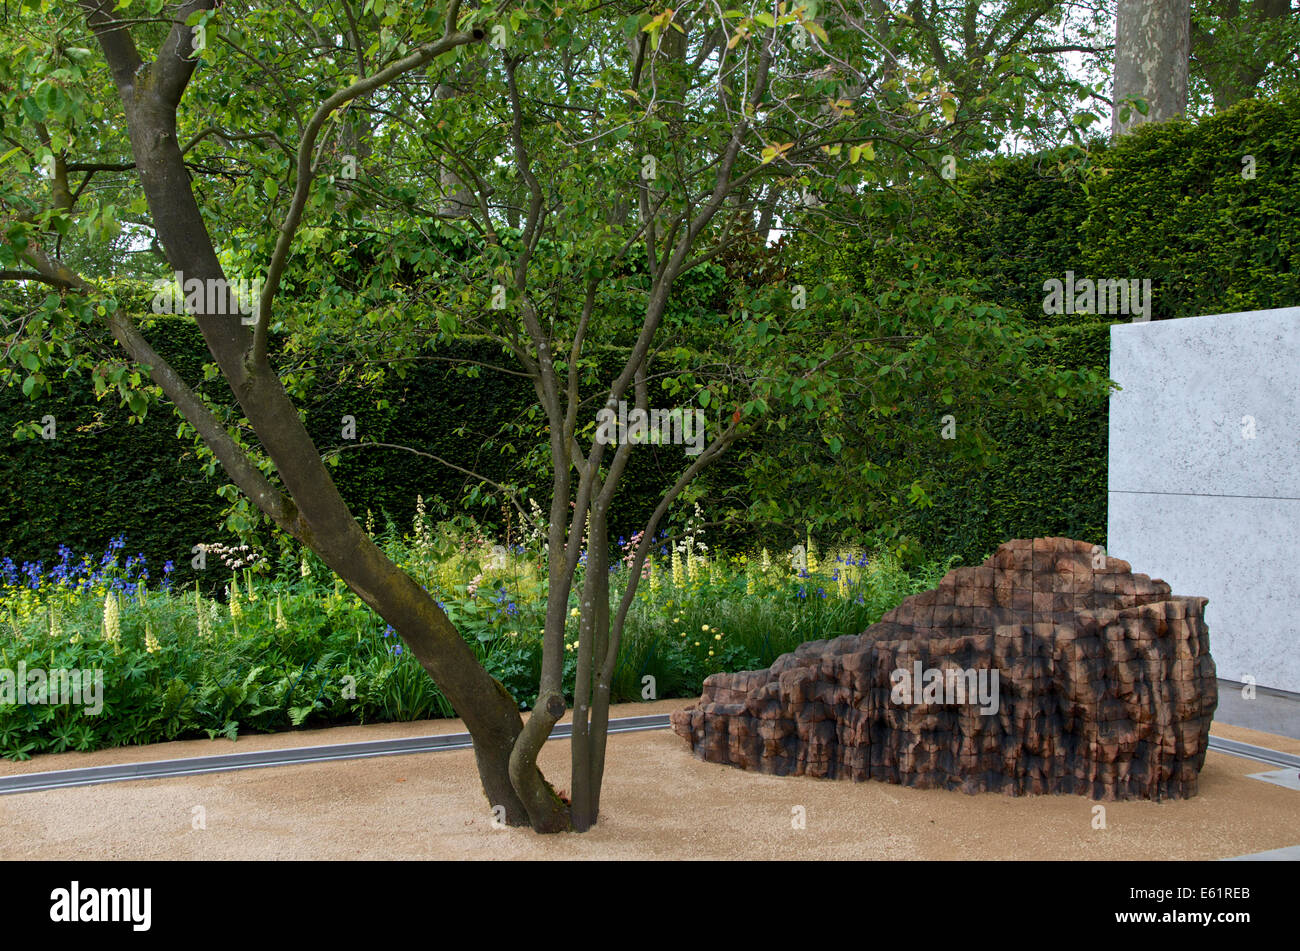 Cedar beam in The Laurent-Perrier Garden designed by Luciano Giubbilei at RHS Chelsea Flower Show 2014 Stock Photo